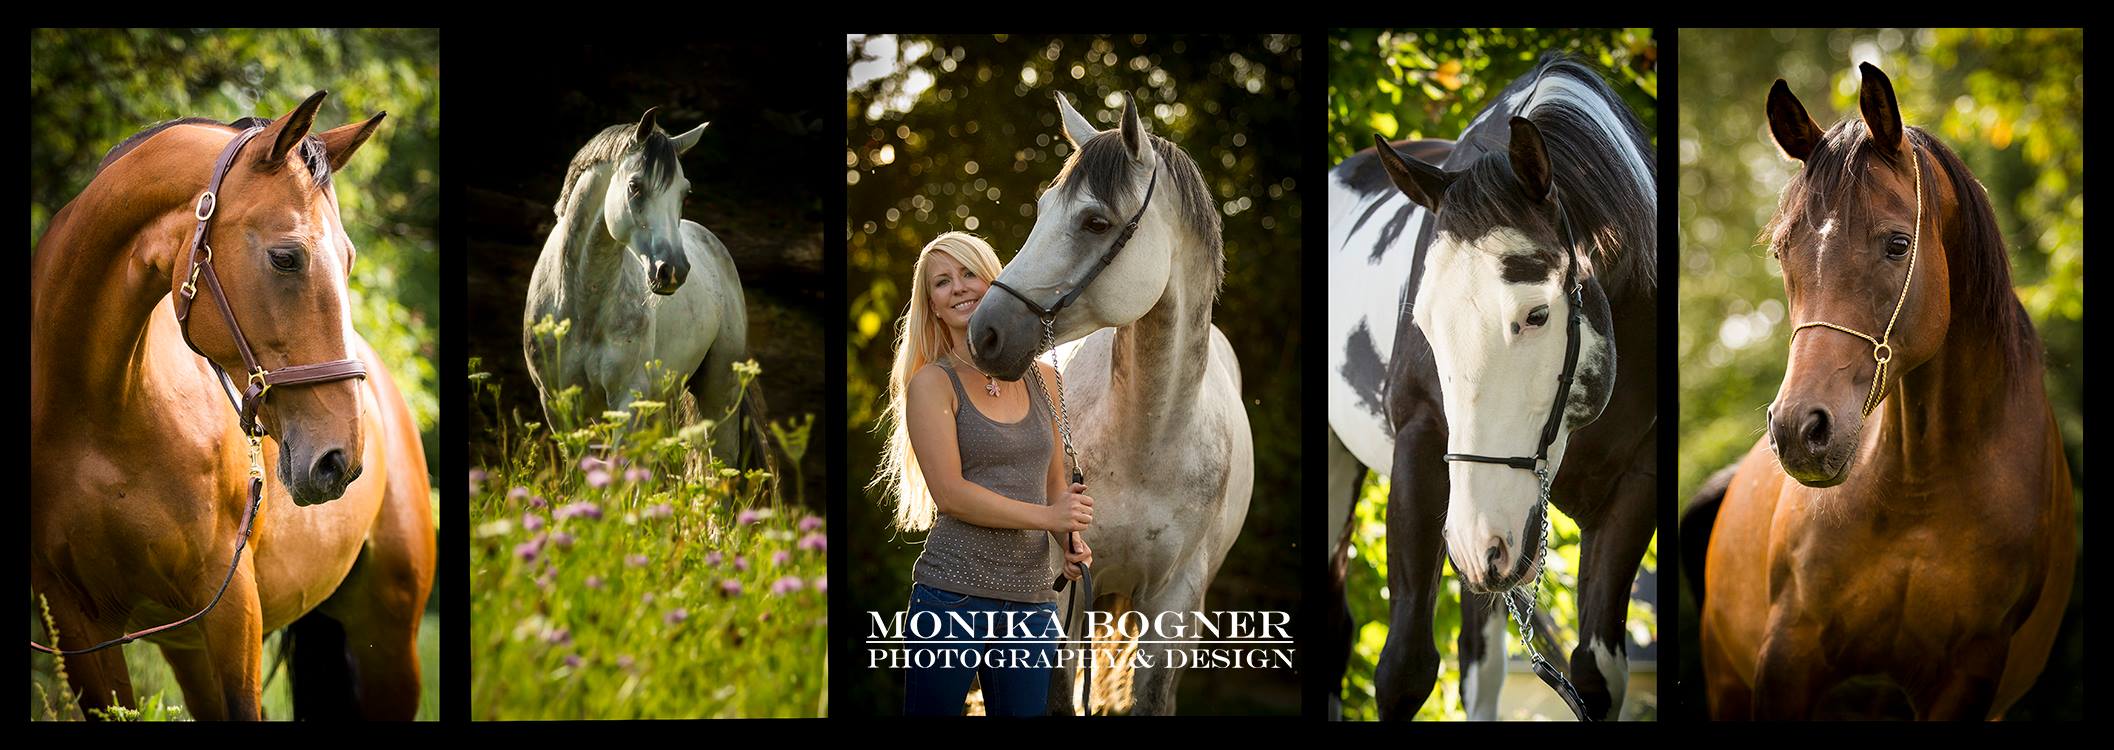 Monika Bogner Photography - With love for horses and dogs, unforgettable moments captured in pictures